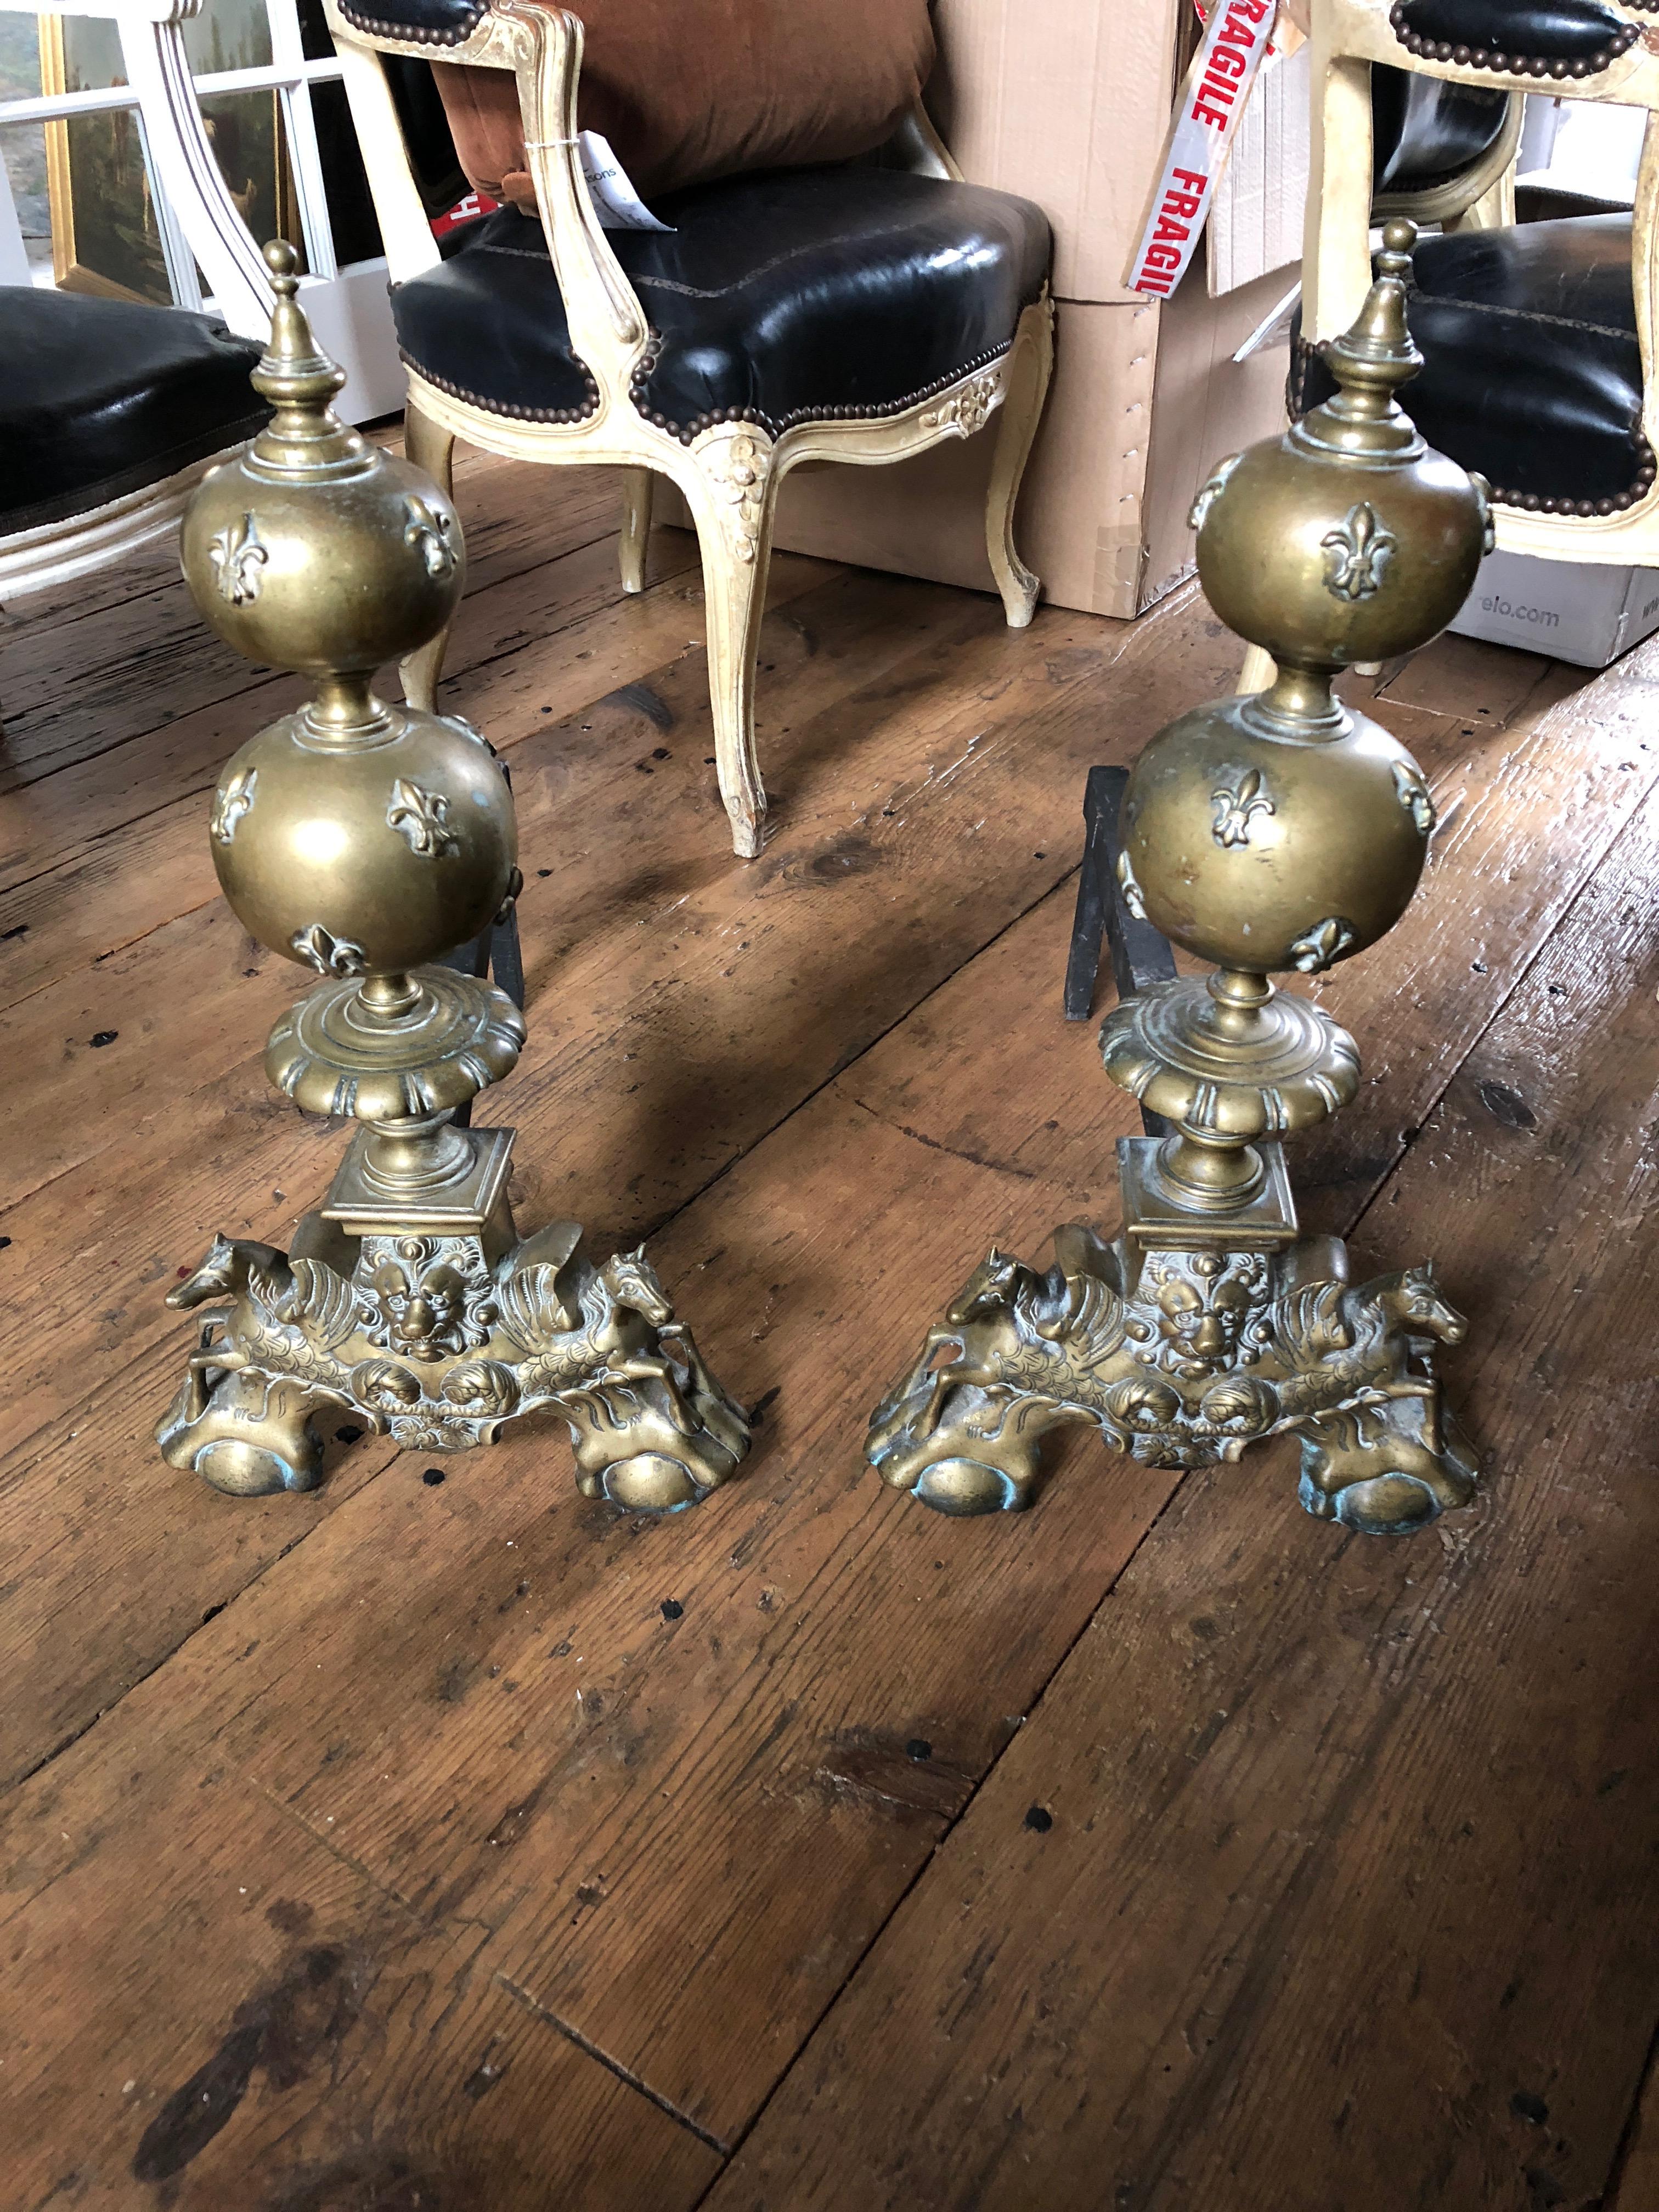 Monumental Sublime Fleur de Lis Motife French Antique Andirons In Good Condition For Sale In Hopewell, NJ